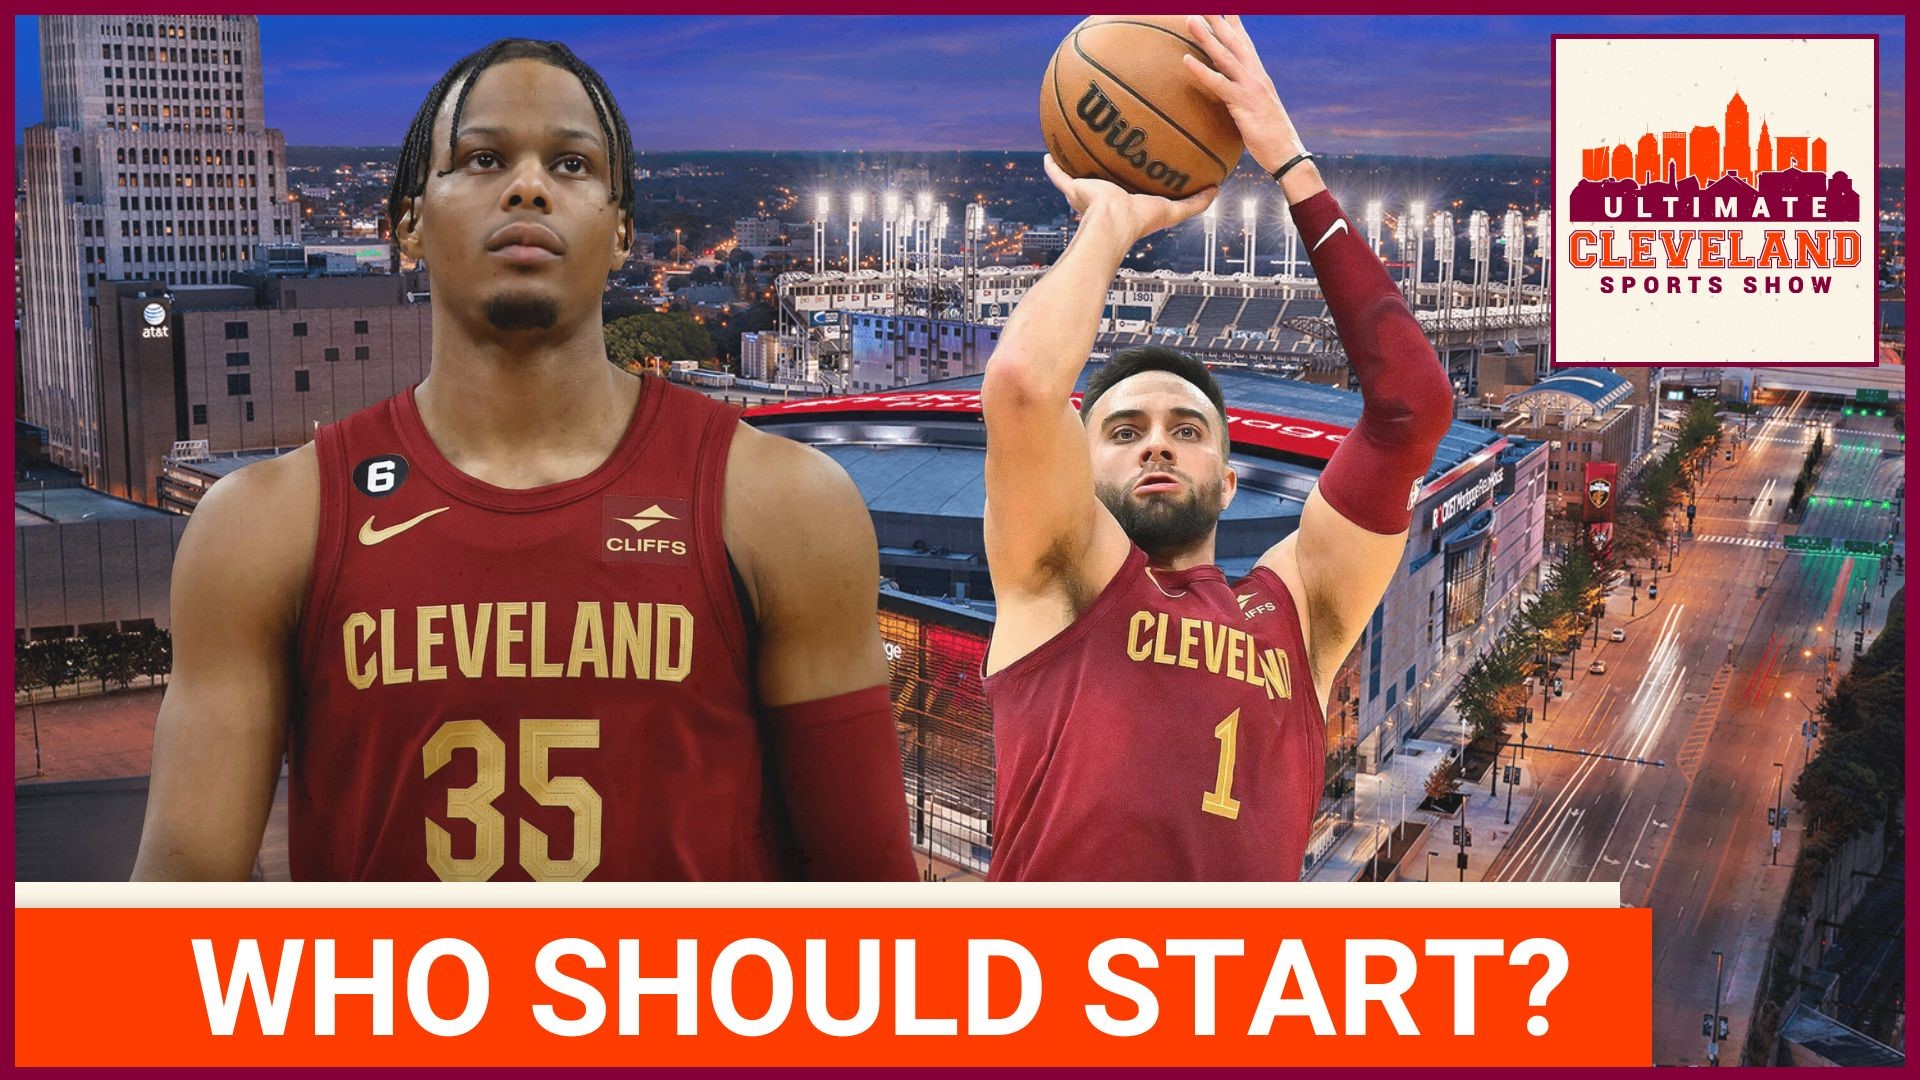 Should the Cleveland Cavaliers make a lineup change ahead of their matchup against the Orlando Magic